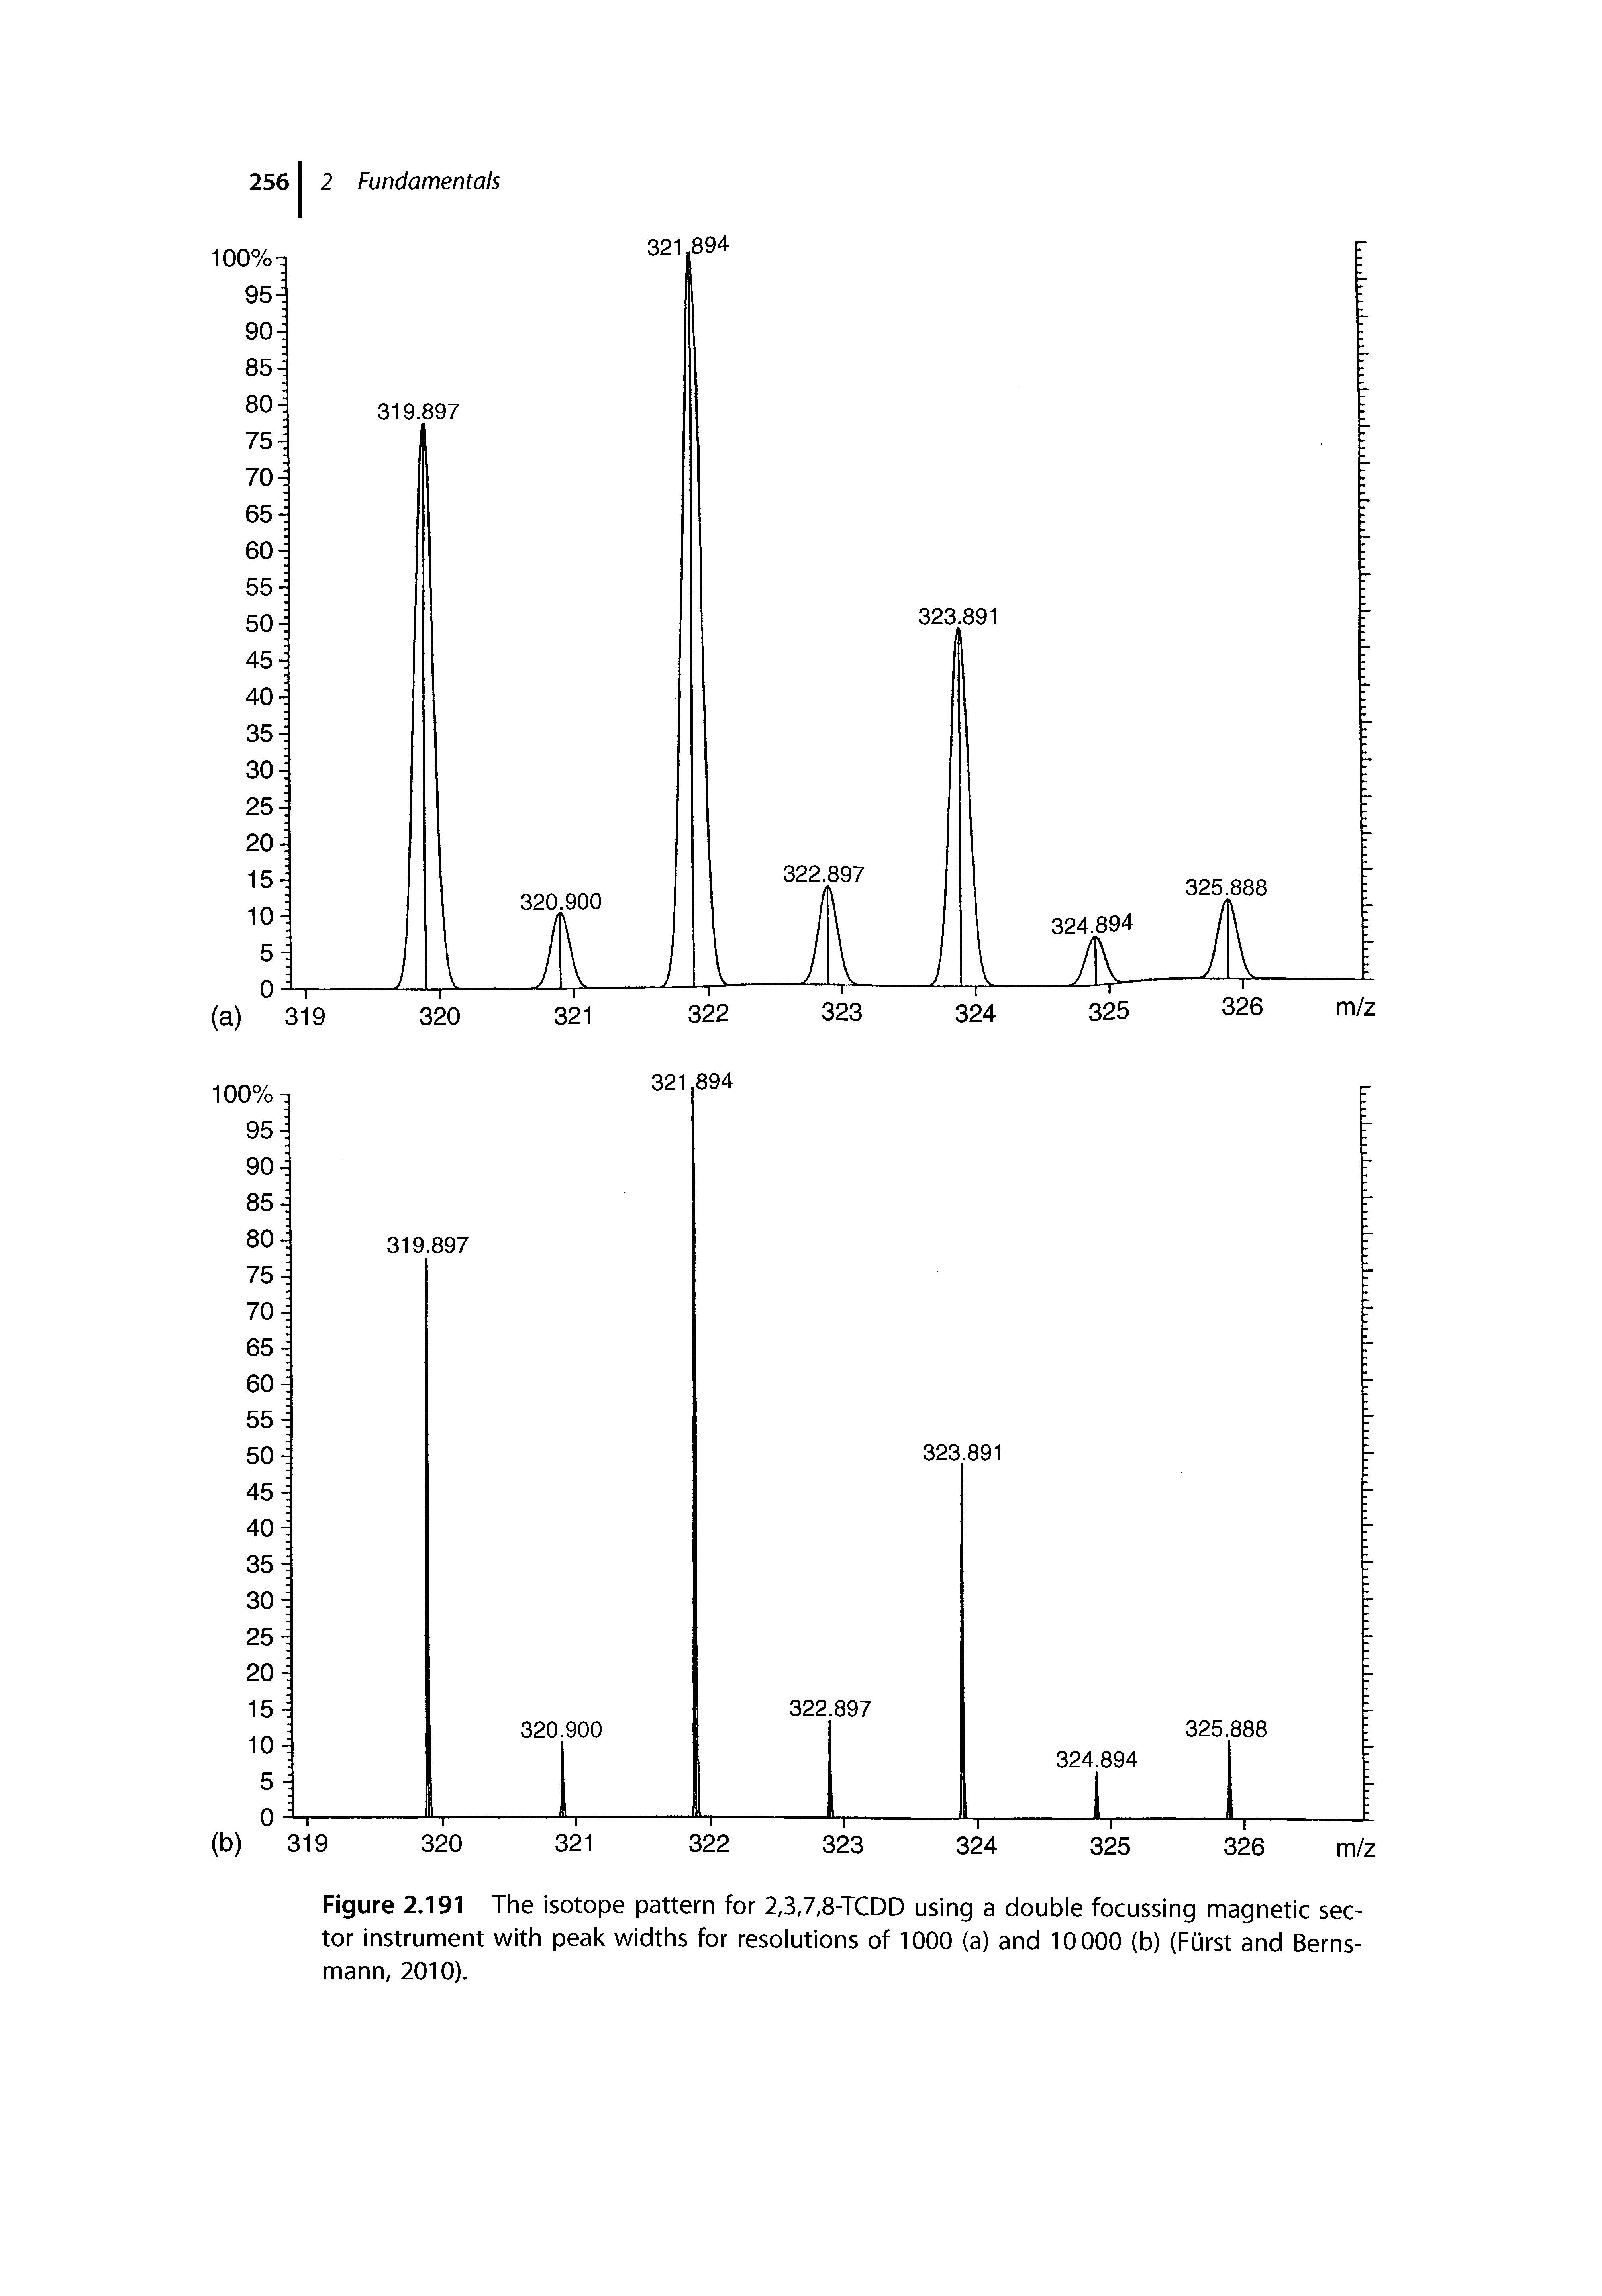 Figure 2.191 The isotope pattern for 2,3,7,8-TCDD using a double focussing magnetic sector instrument with peak widths for resolutions of 1000 (a) and 10000 (b) (Furst and Berns-mann, 2010).